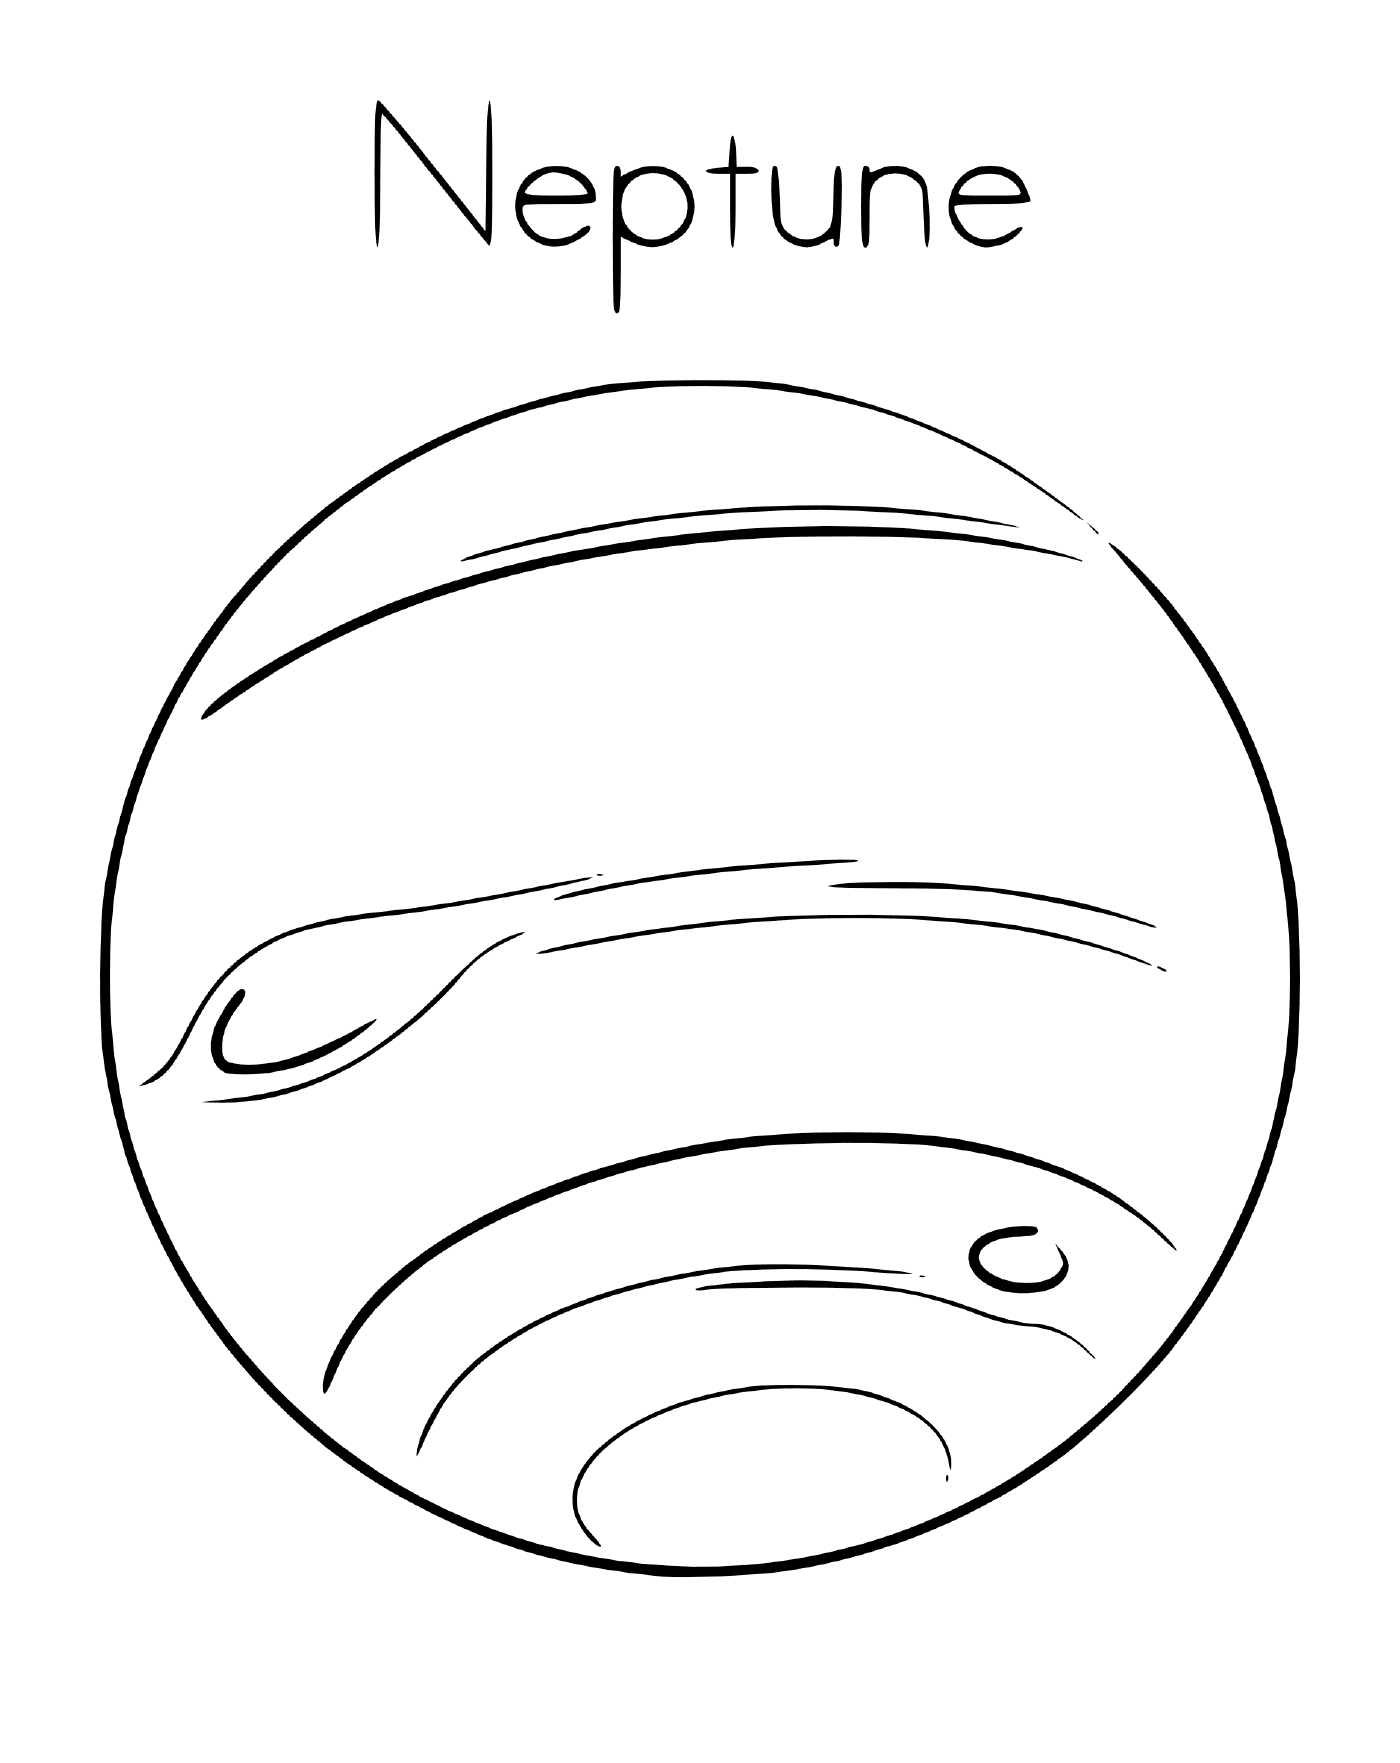  Planet Neptune in space 